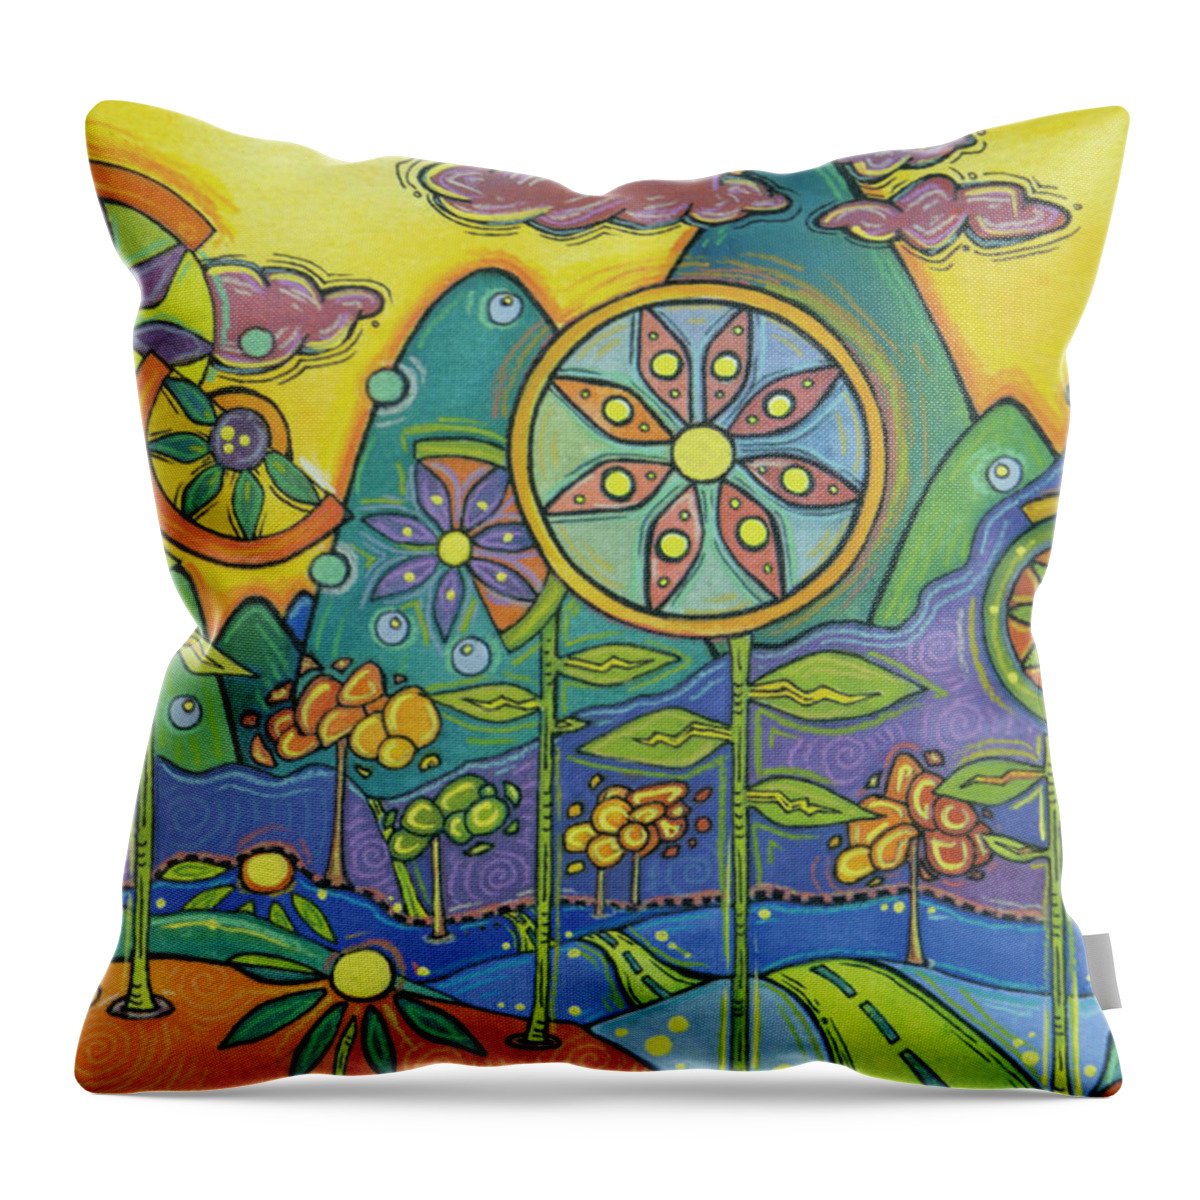 Eamscape Throw Pillow featuring the painting Once Upon a Dream by Tanielle Childers